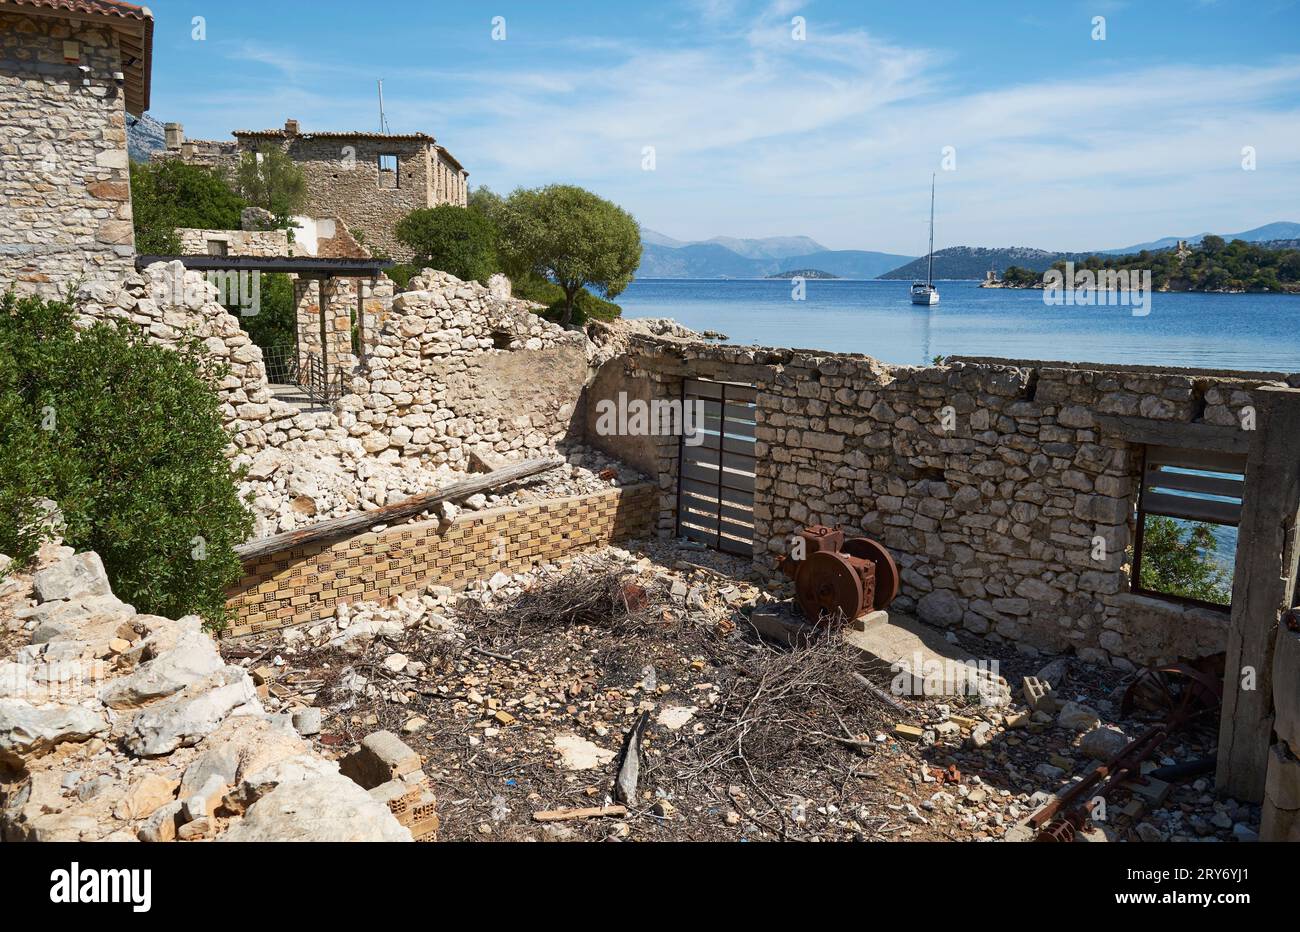 Olive Press in ruins of Port Leone, with sailing boat at anchor in background on Kalamos Island, Ionian, Greece. Stock Photo